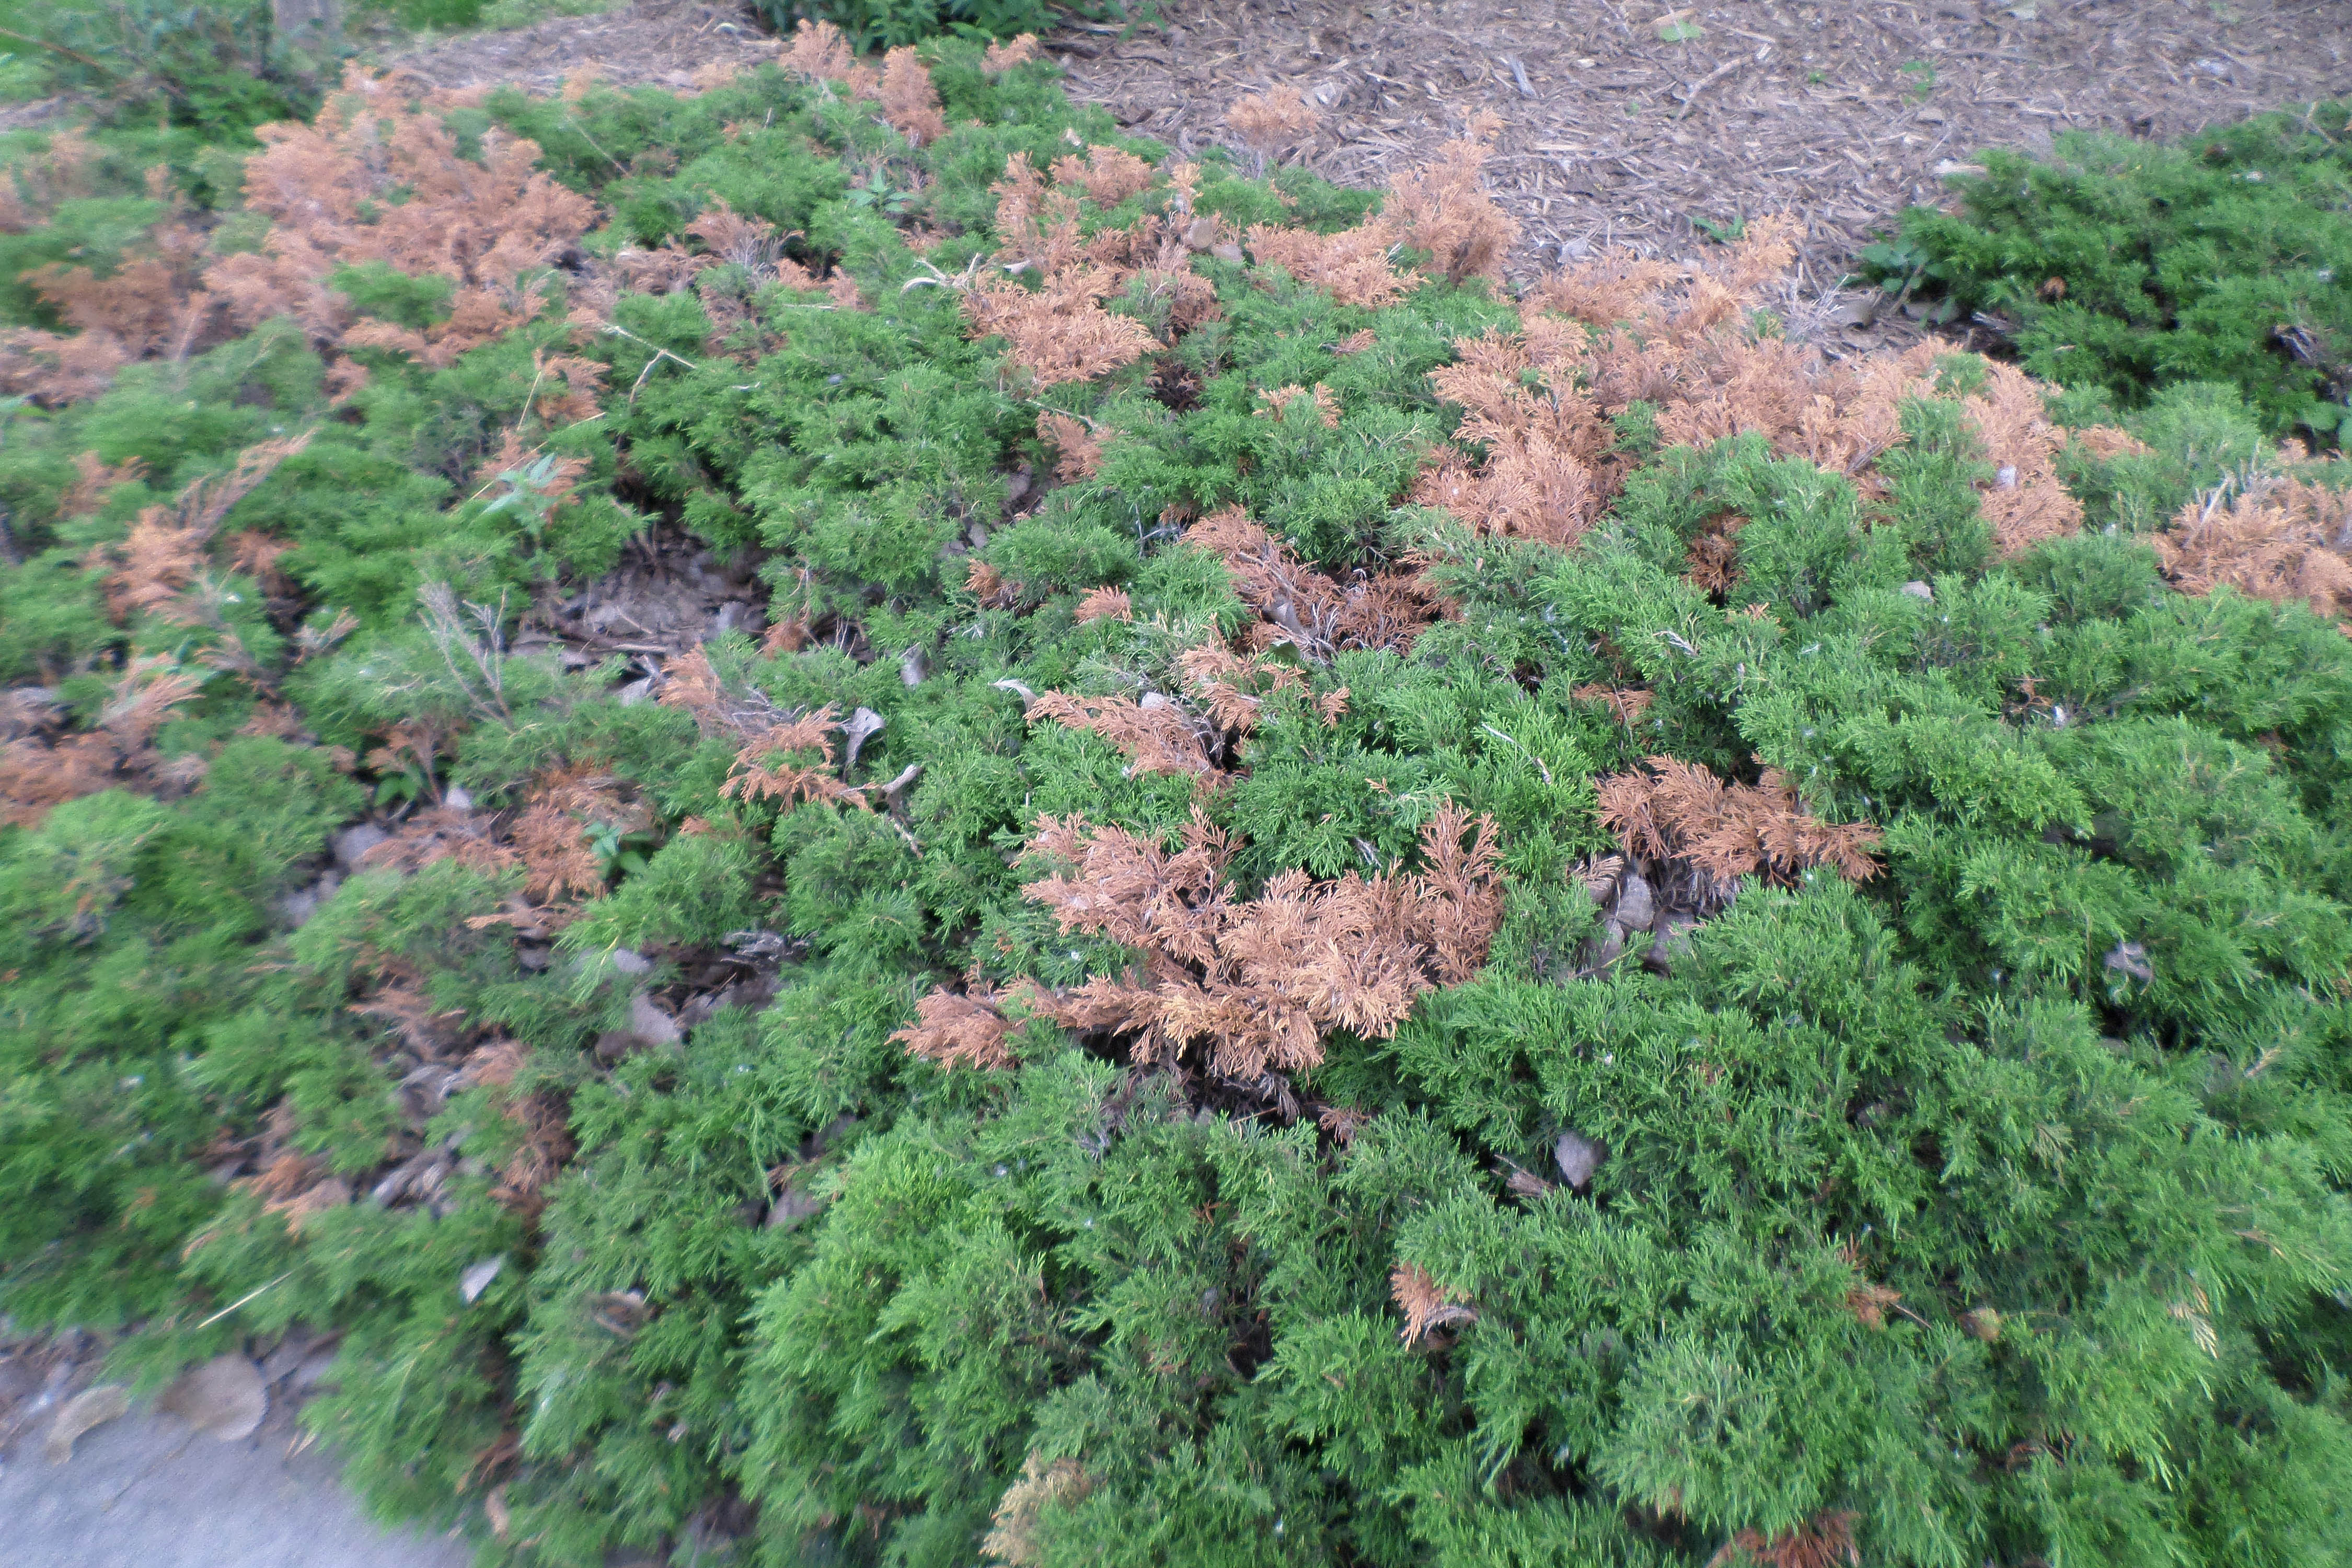 juniper greens with noticable browning on shoot tips.